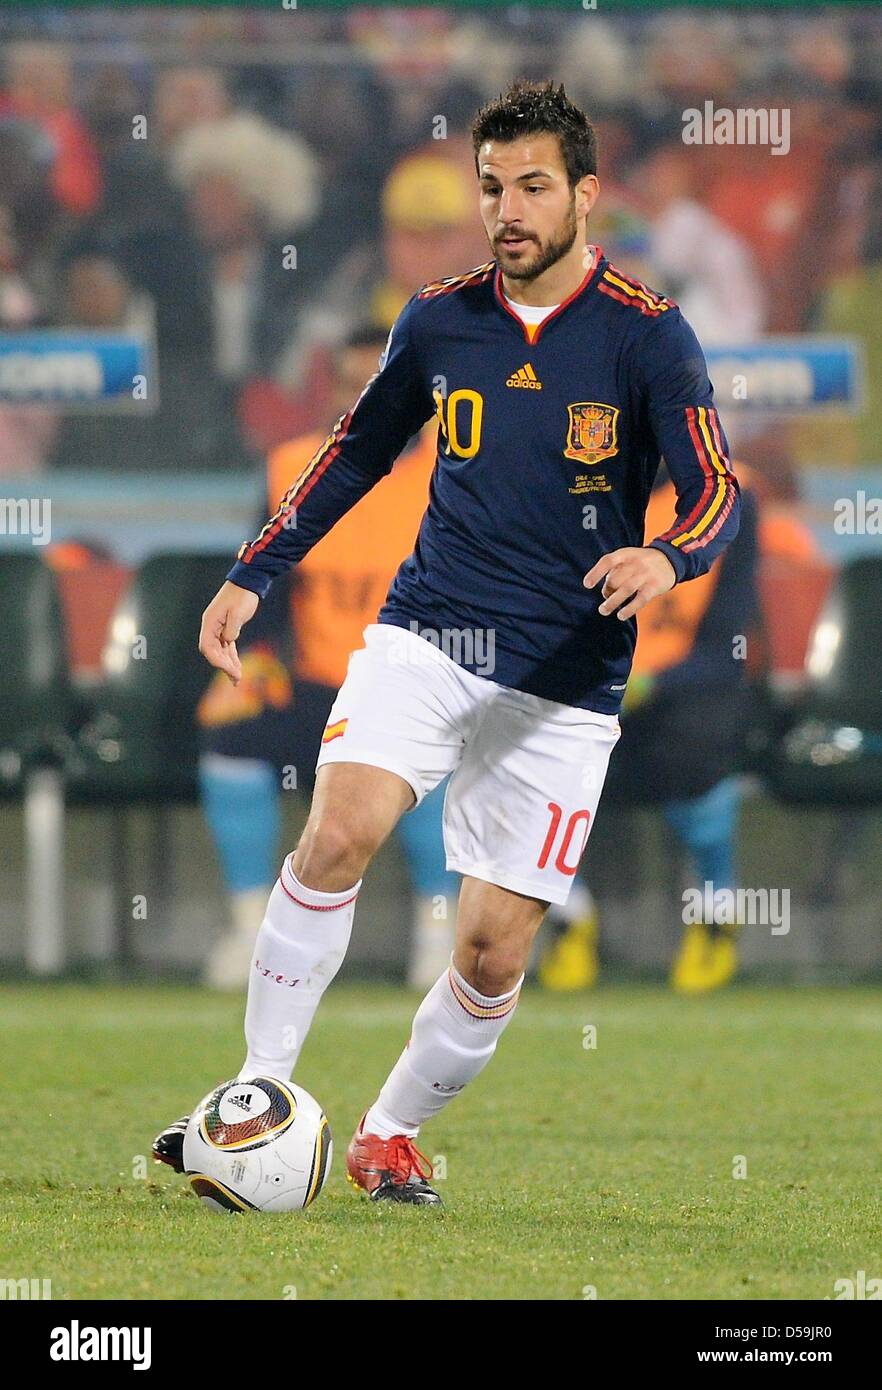 Spain's Cesc Fabregas during the 2010 FIFA World Cup group H match between Chile and Spain at Loftus Versfeld Stadium in Pretoria, South Africa 25 June 2010. Photo: Marcus Brandt dpa - Please refer to http://dpaq.de/FIFA-WM2010-TC Stock Photo